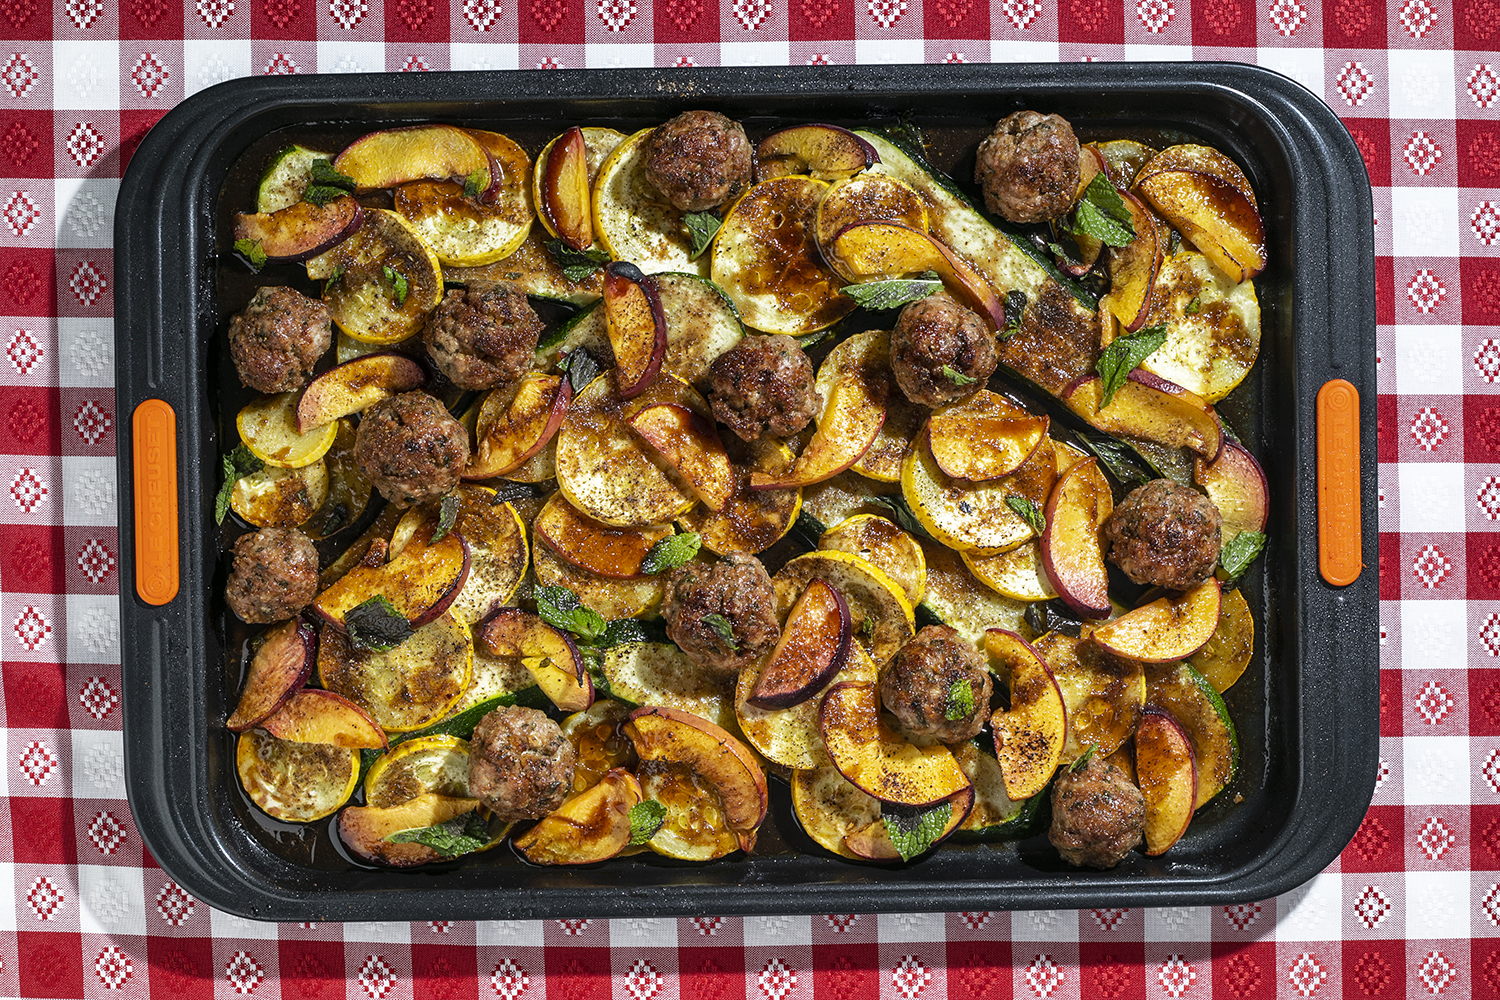 Sheet Pan Tingly Meatballs with Charred Peaches and Summer Squash